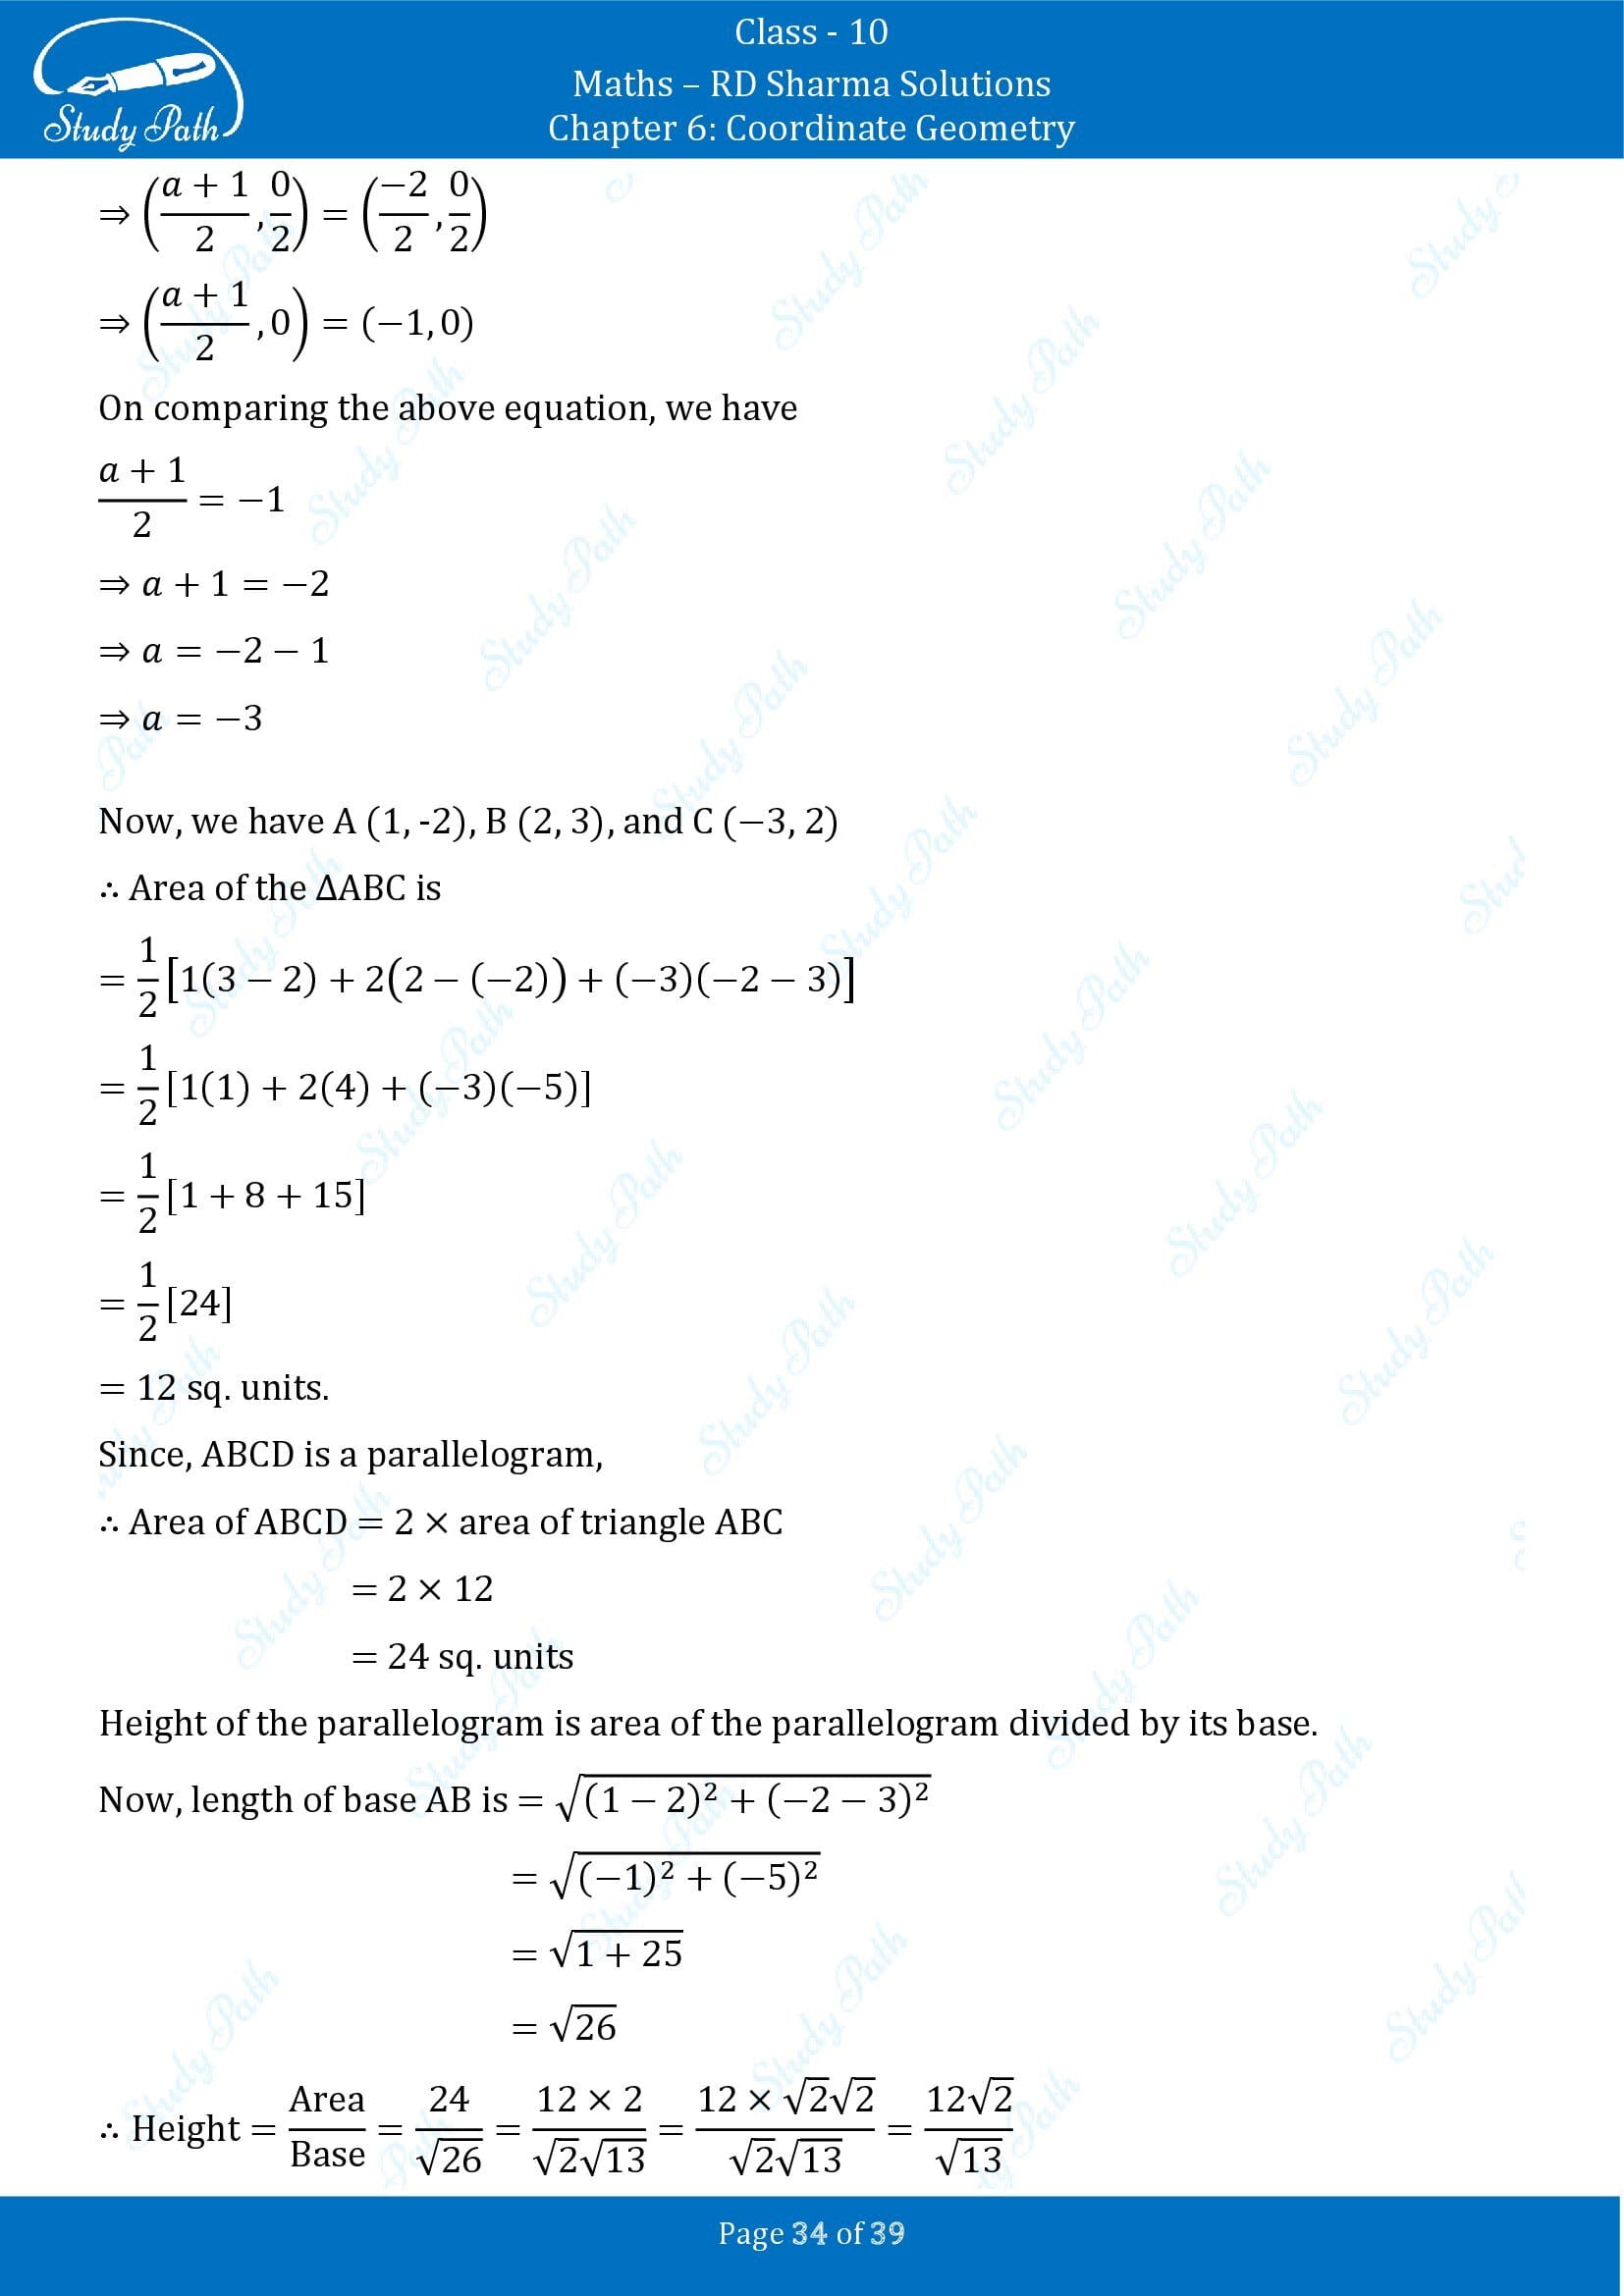 RD Sharma Solutions Class 10 Chapter 6 Coordinate Geometry Exercise 6.5 0034